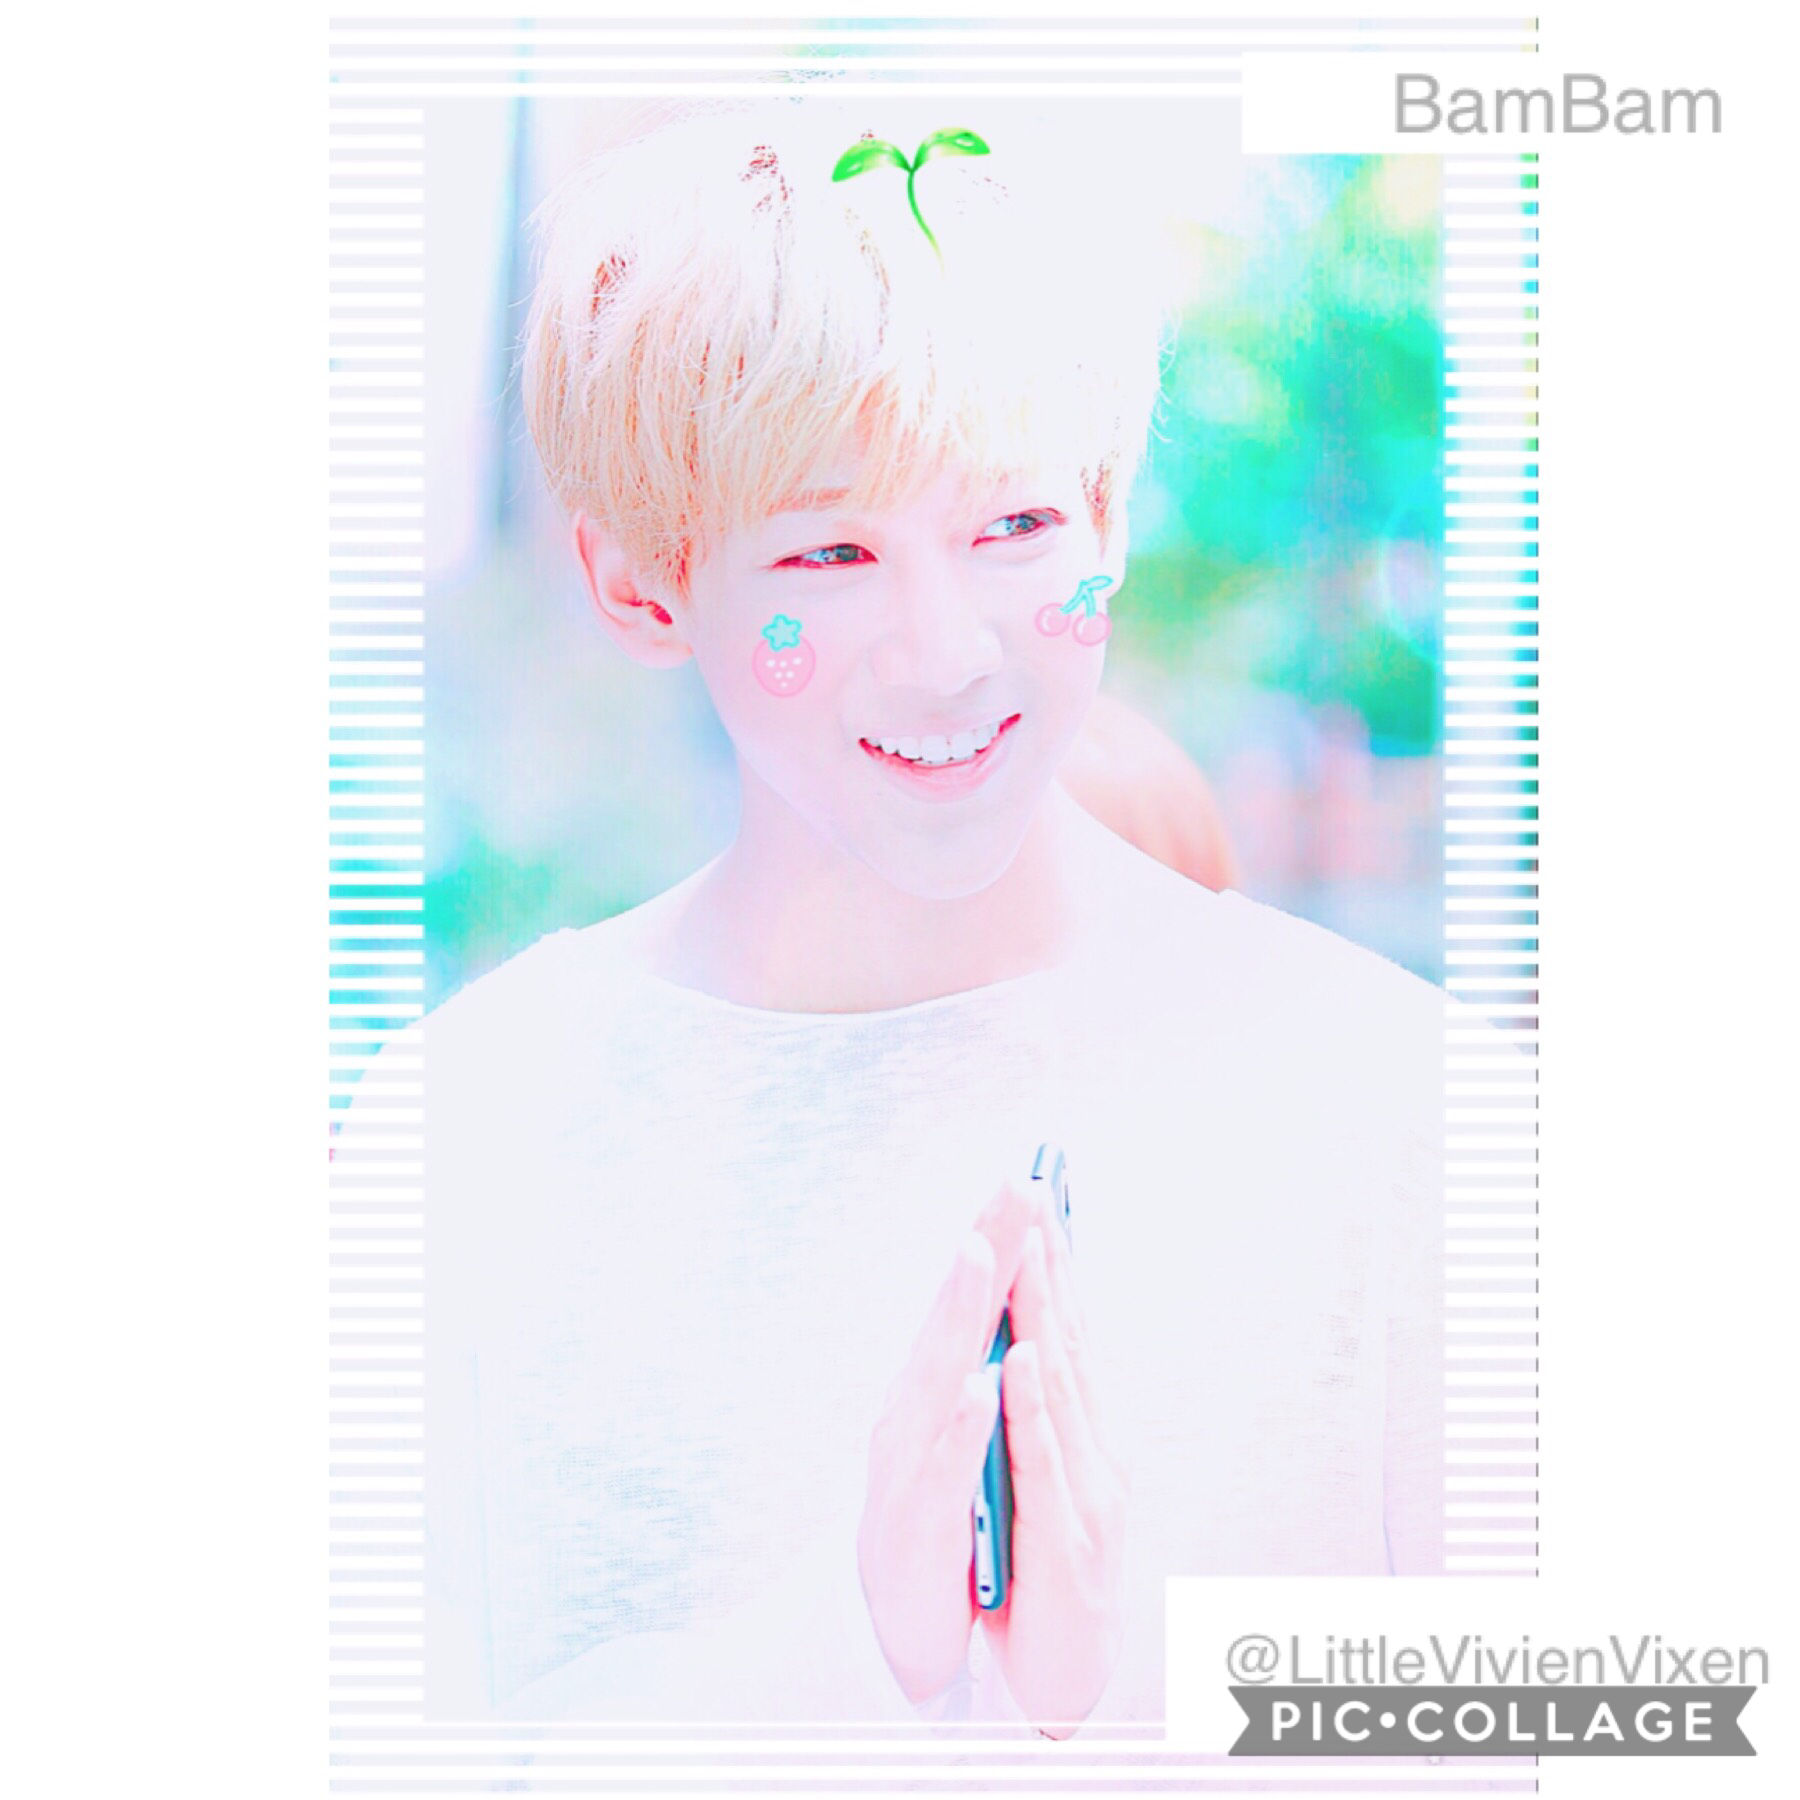 (BamBam-Got7)
Haven't posted an edit in a while and I wanted to make this for my friends sO